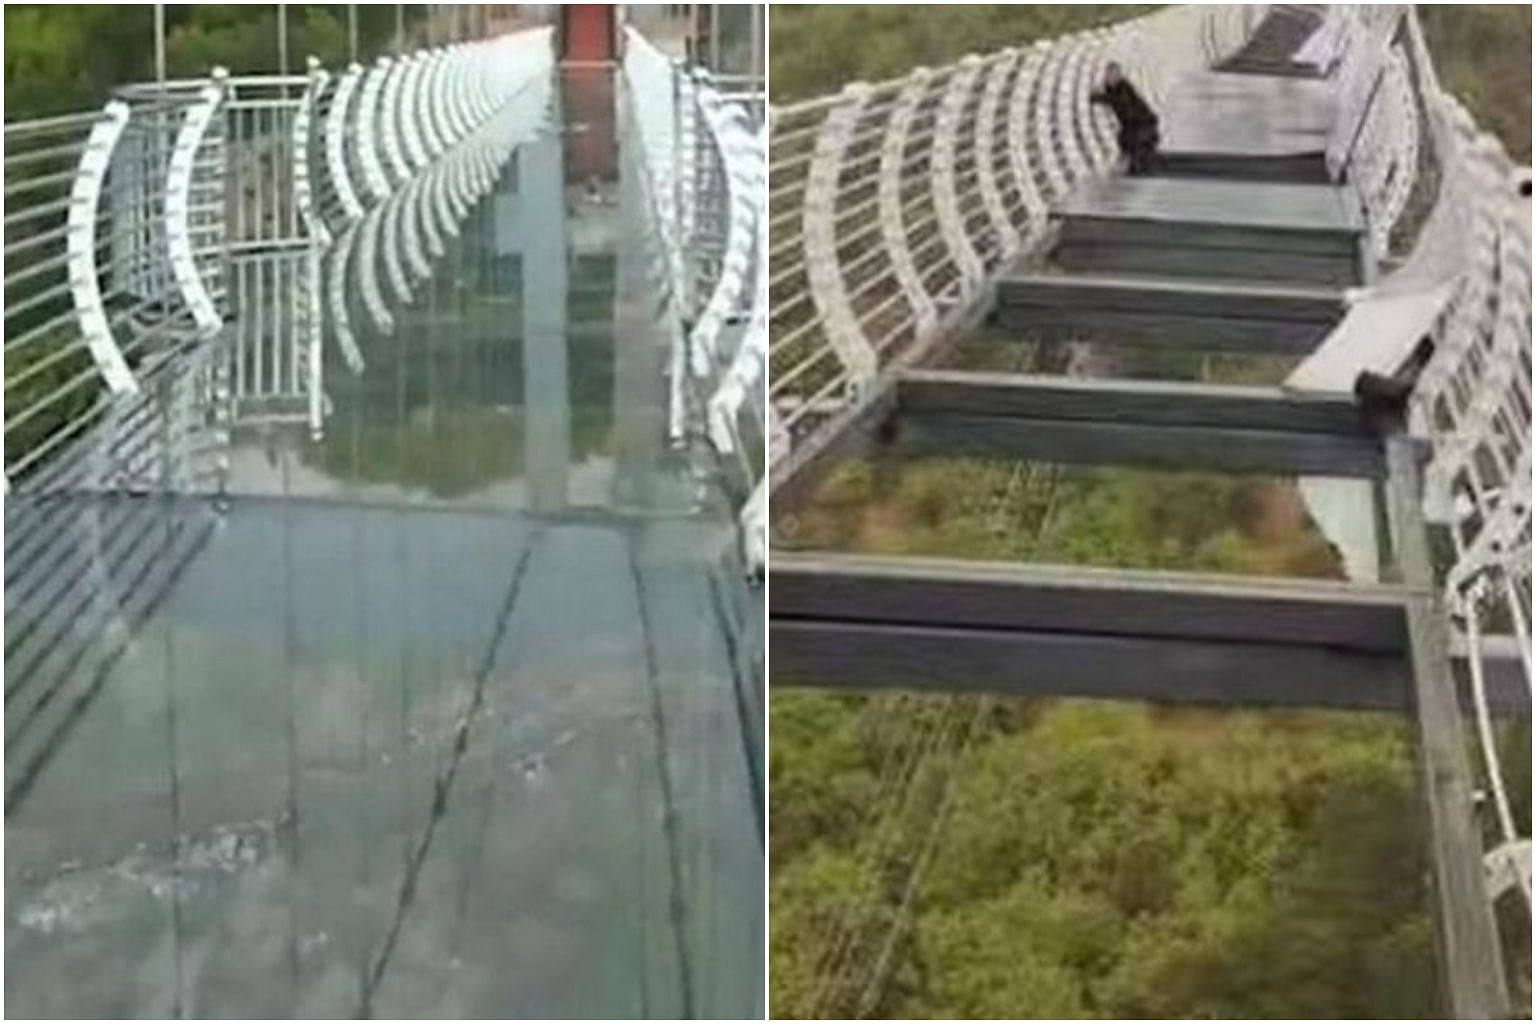 Tourist Stranded On Glass Bridge Triggers Safety Concerns Across China East Asia News Top Stories The Straits Times